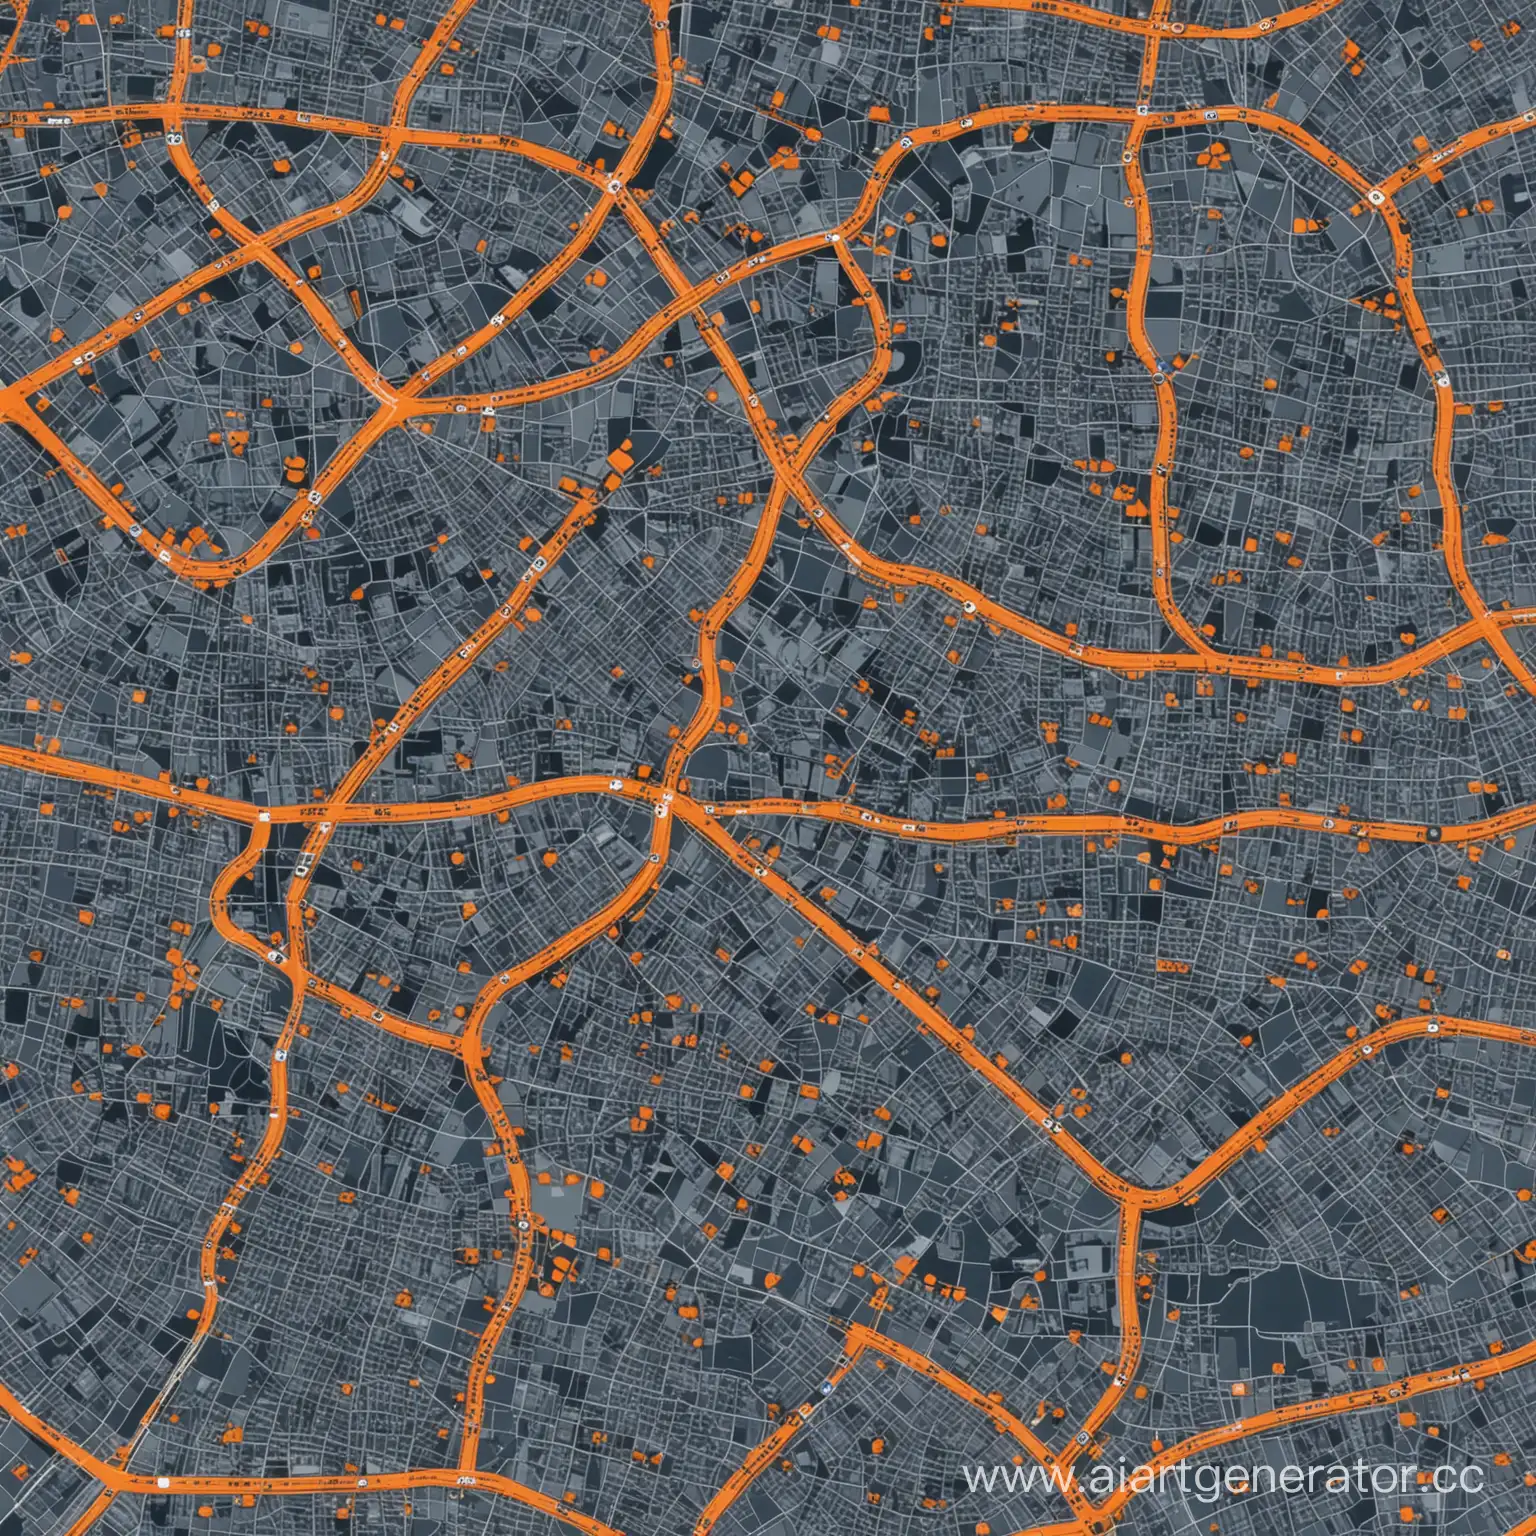 Urban-Navigation-App-with-Dog-Paw-Prints-in-GrayBlue-Tones